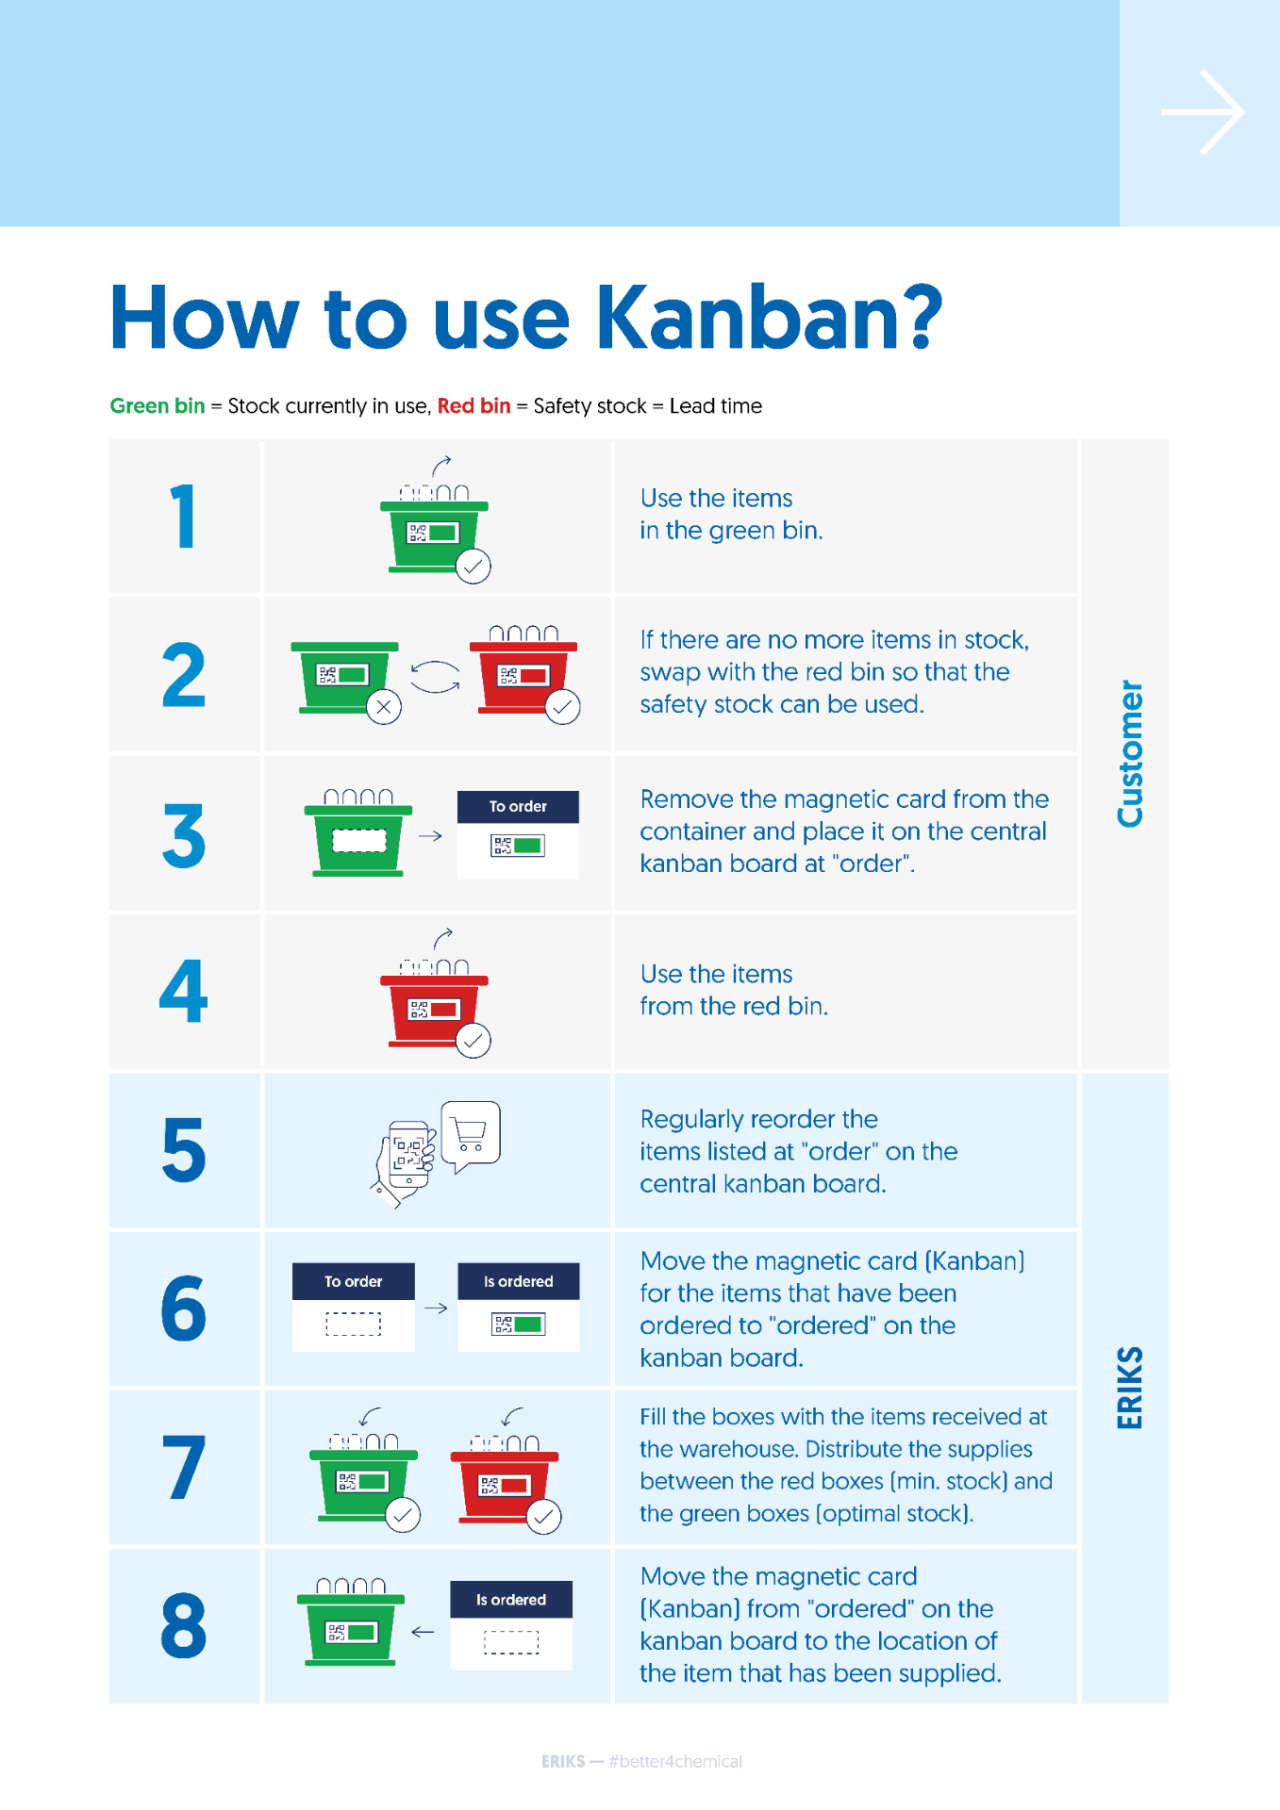 How to use Kanban